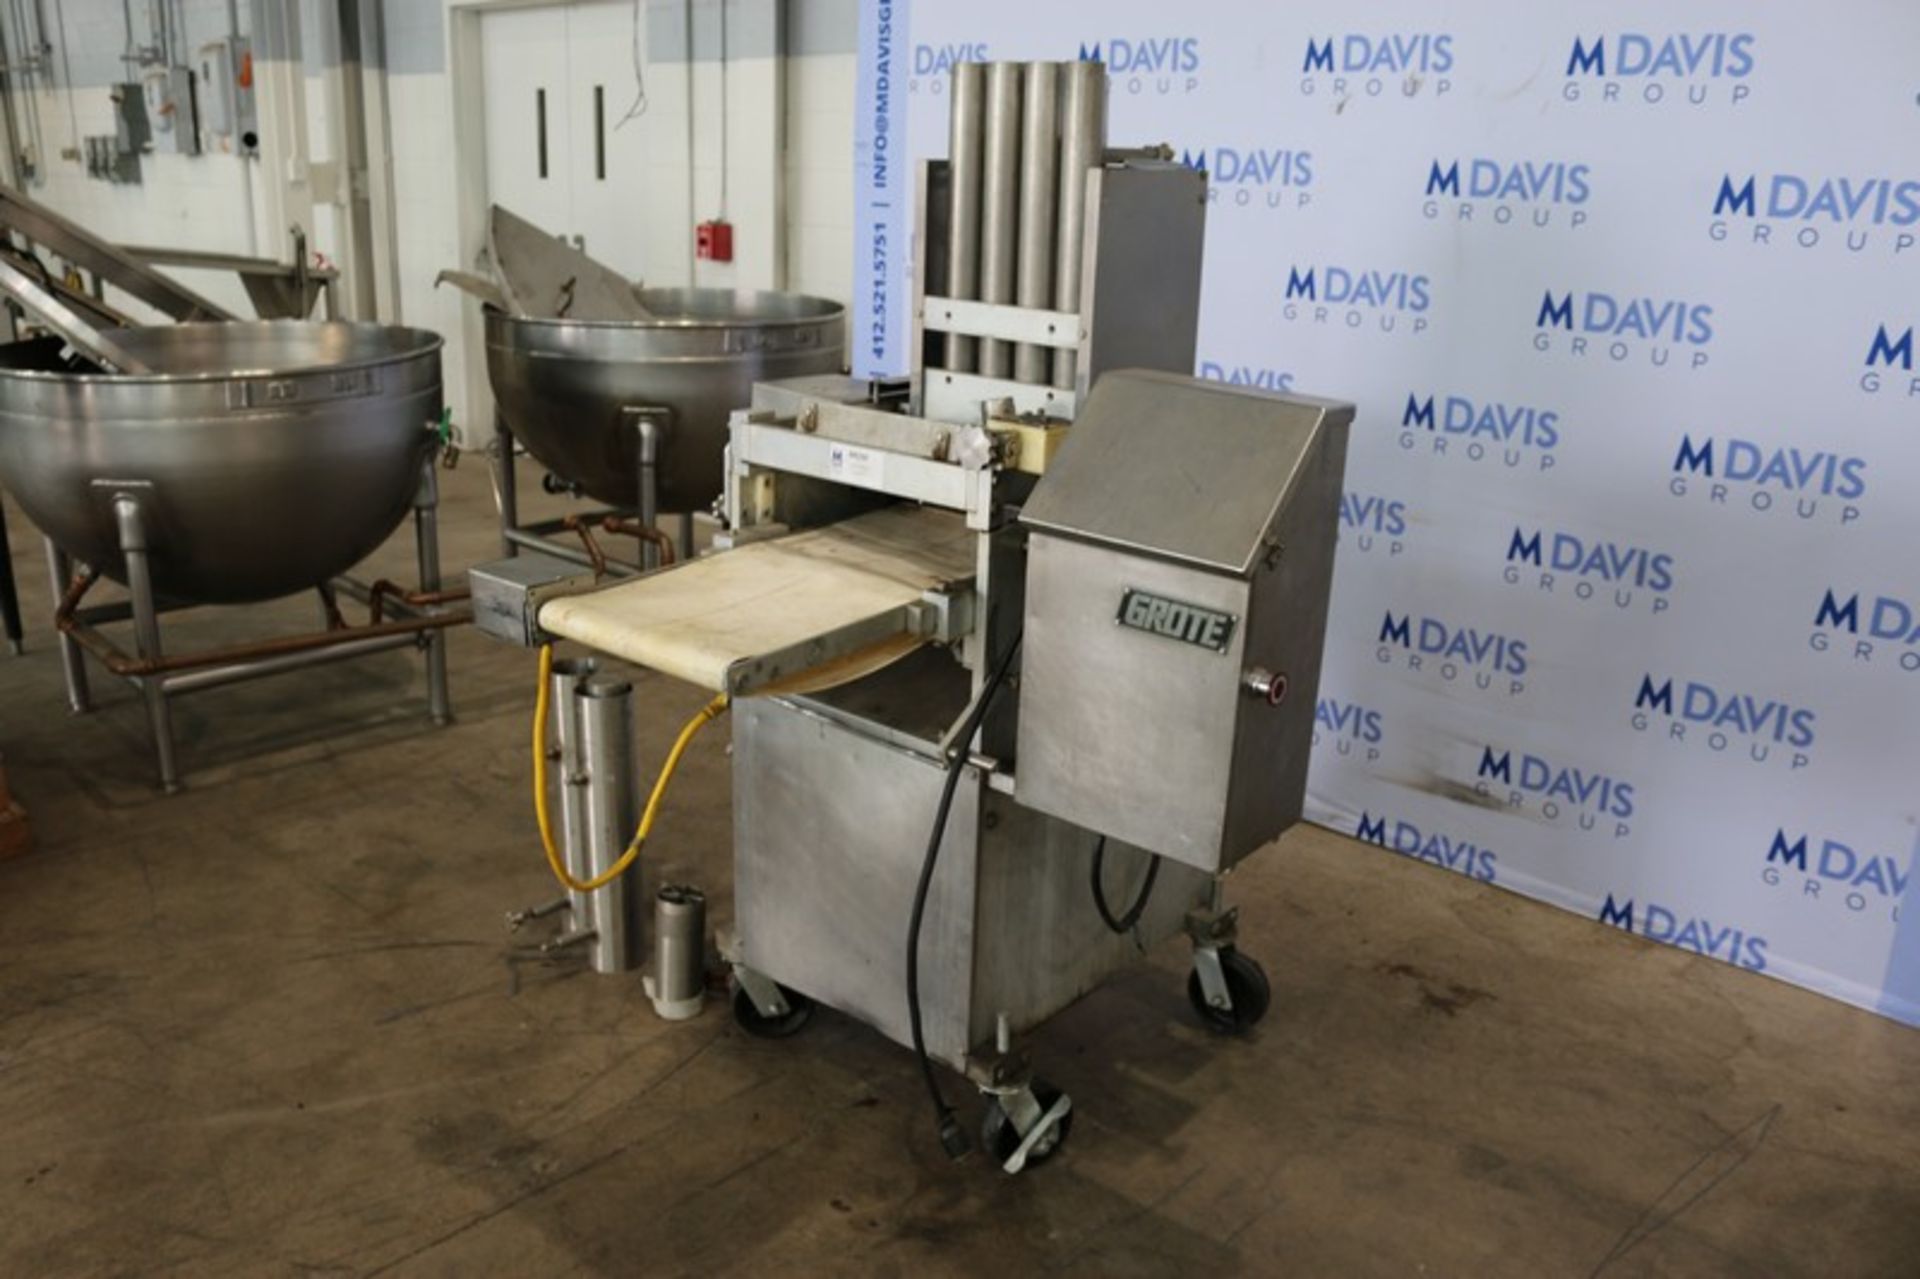 Grote S/S Multi-Slicer, M/N 713, S/N 1047816, with Aprox. 14" W Outfeed Belt, with S/S Infeed - Image 3 of 12